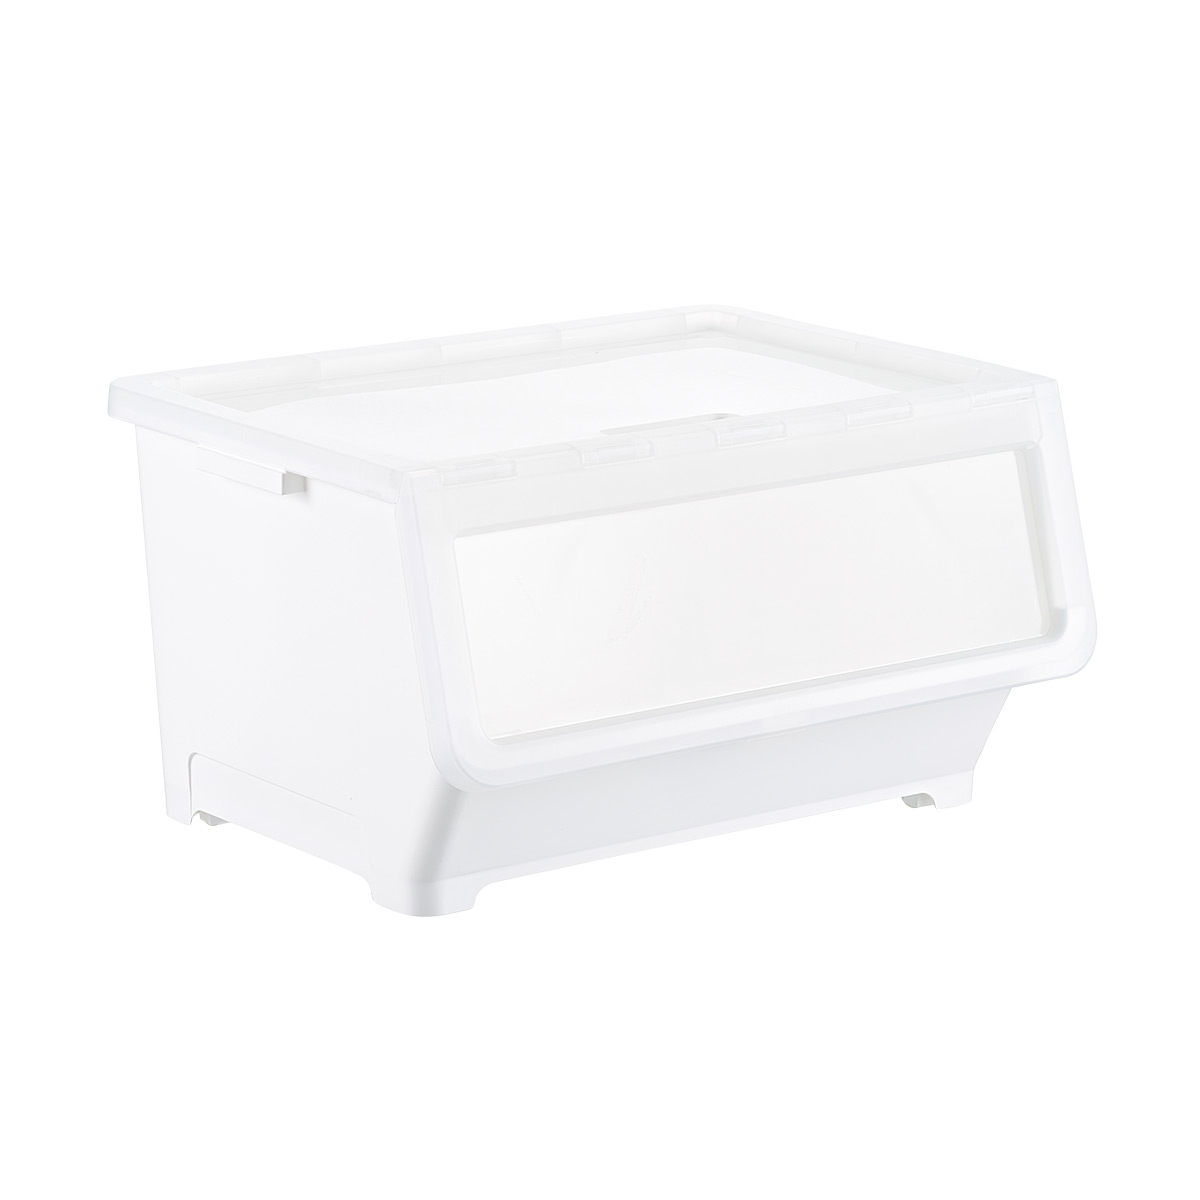 https://www.containerstore.com/catalogimages/364930/10077935-dual-open-lid-picking-bin-w.jpg